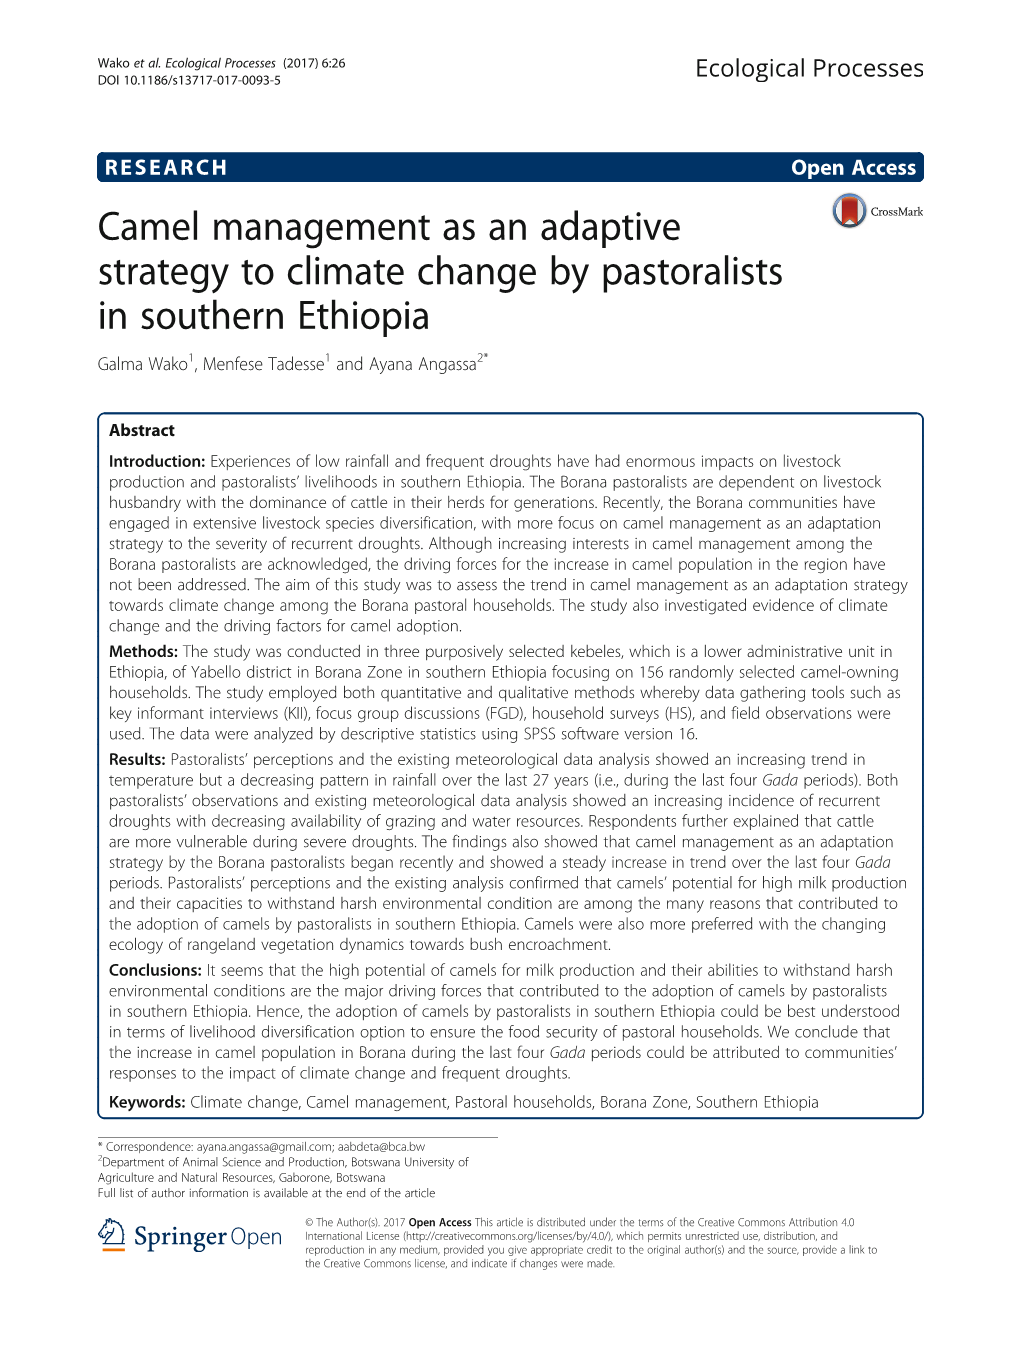 Camel Management As an Adaptive Strategy to Climate Change by Pastoralists in Southern Ethiopia Galma Wako1, Menfese Tadesse1 and Ayana Angassa2*